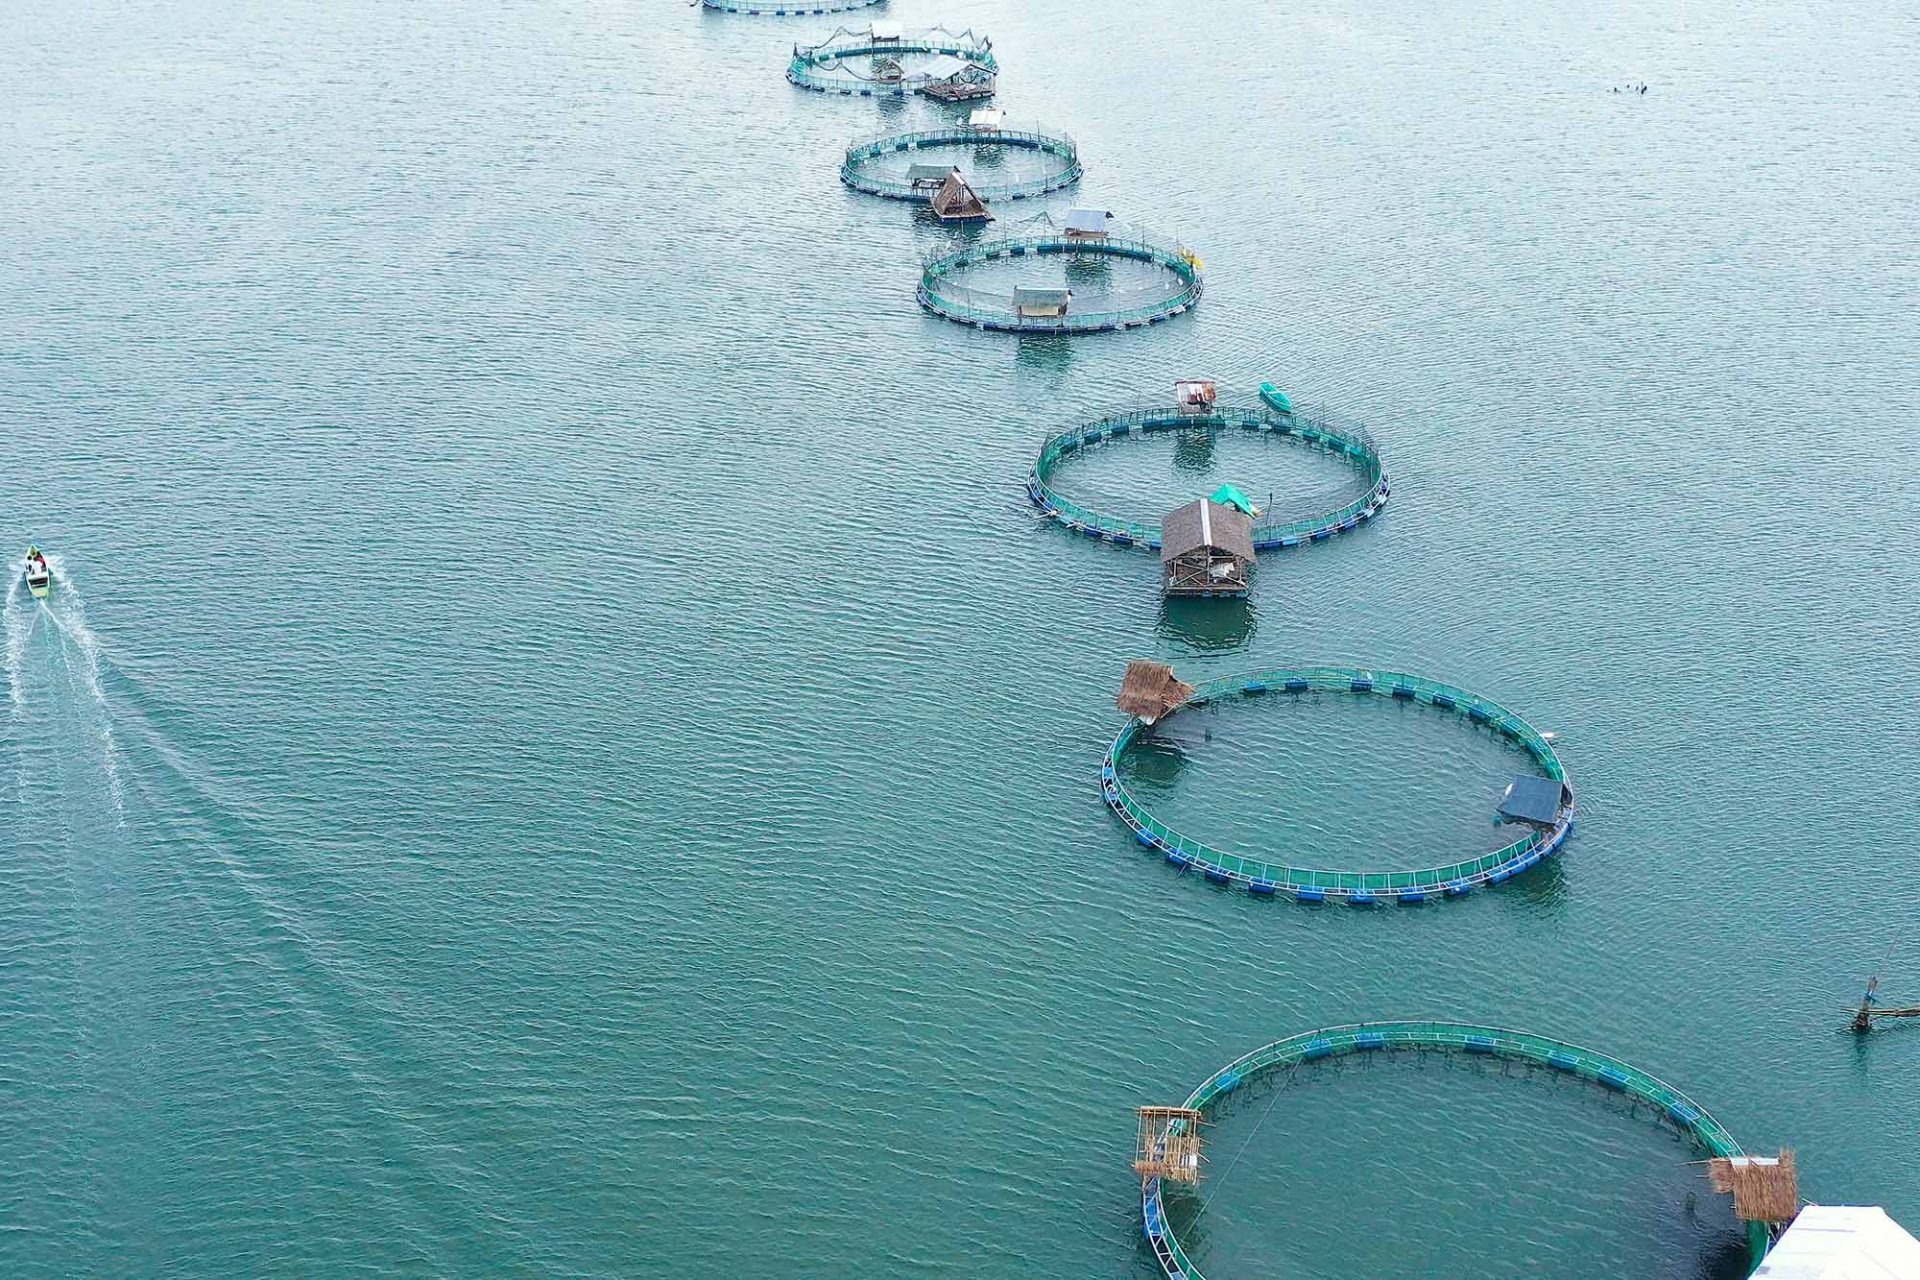 Fishing Industry. Fish Farming On An Industrial Scale.